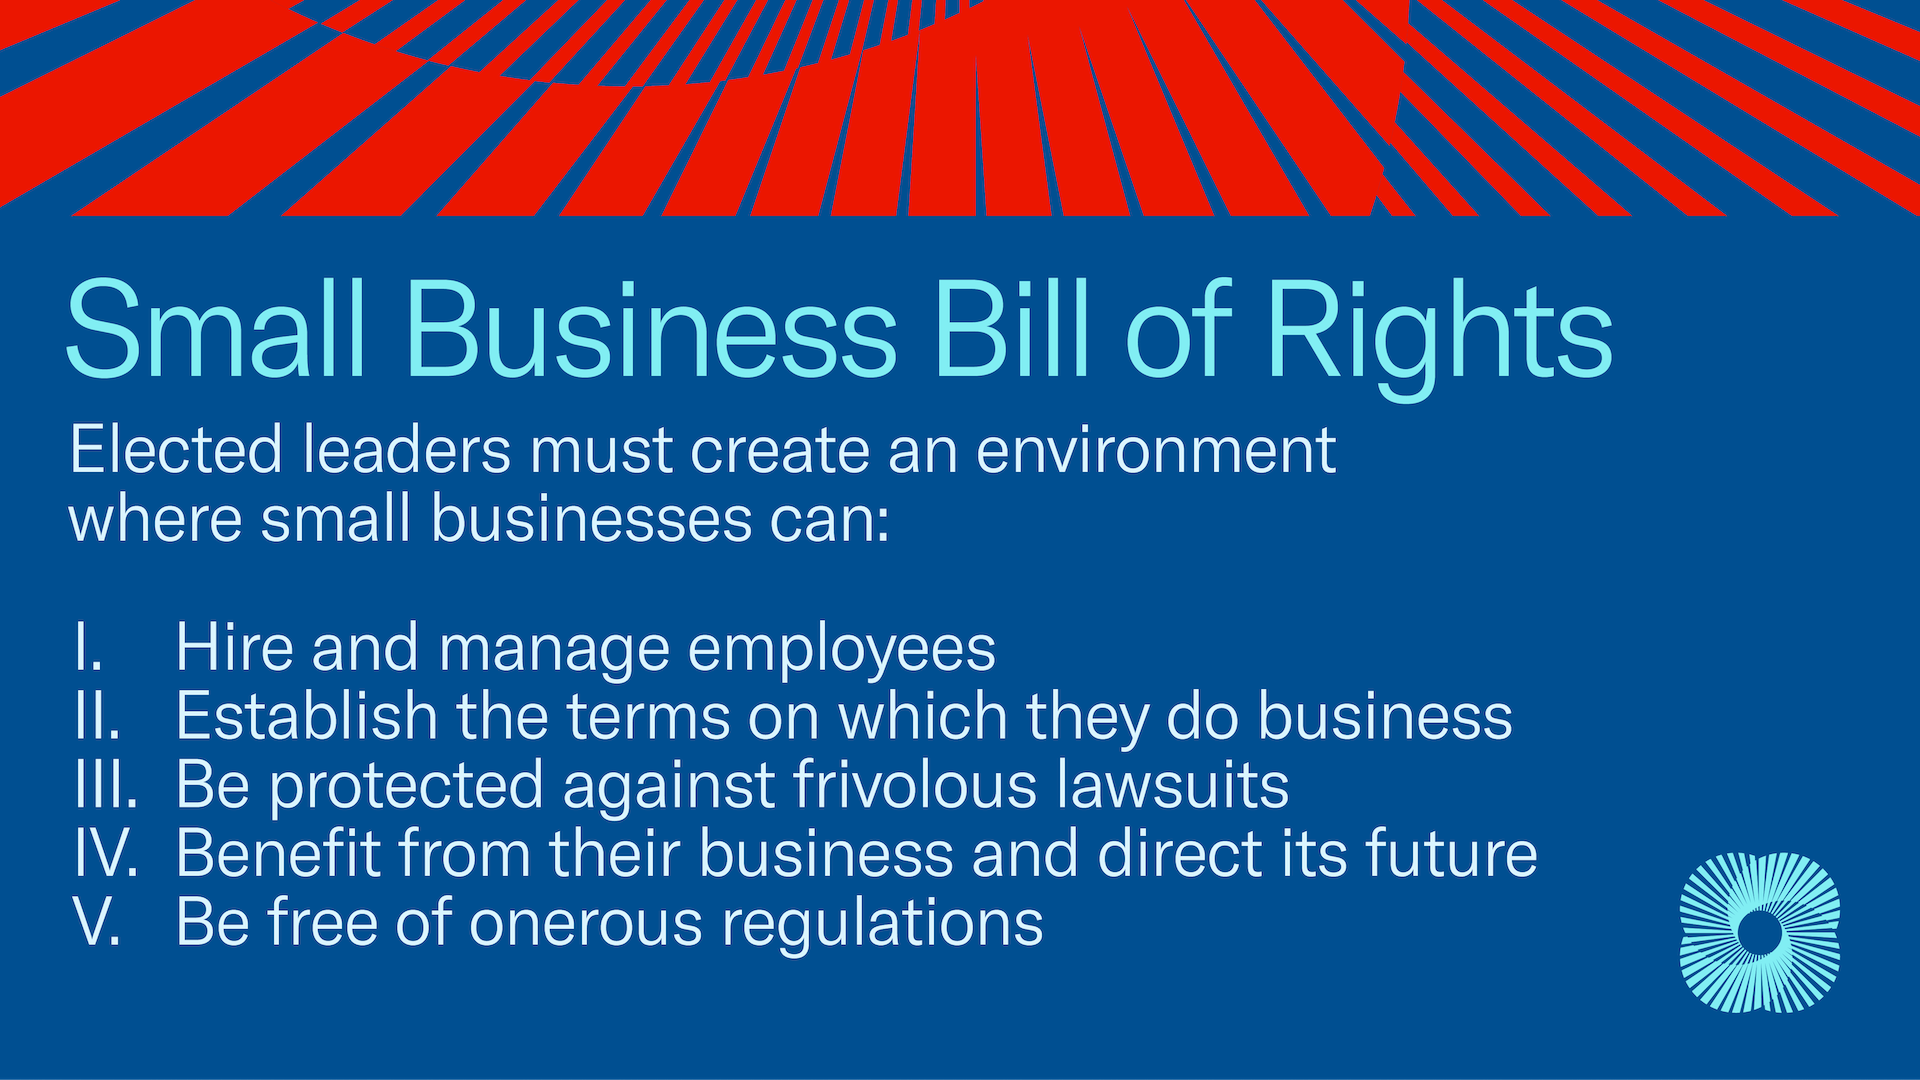 Small Business Bill of Rights